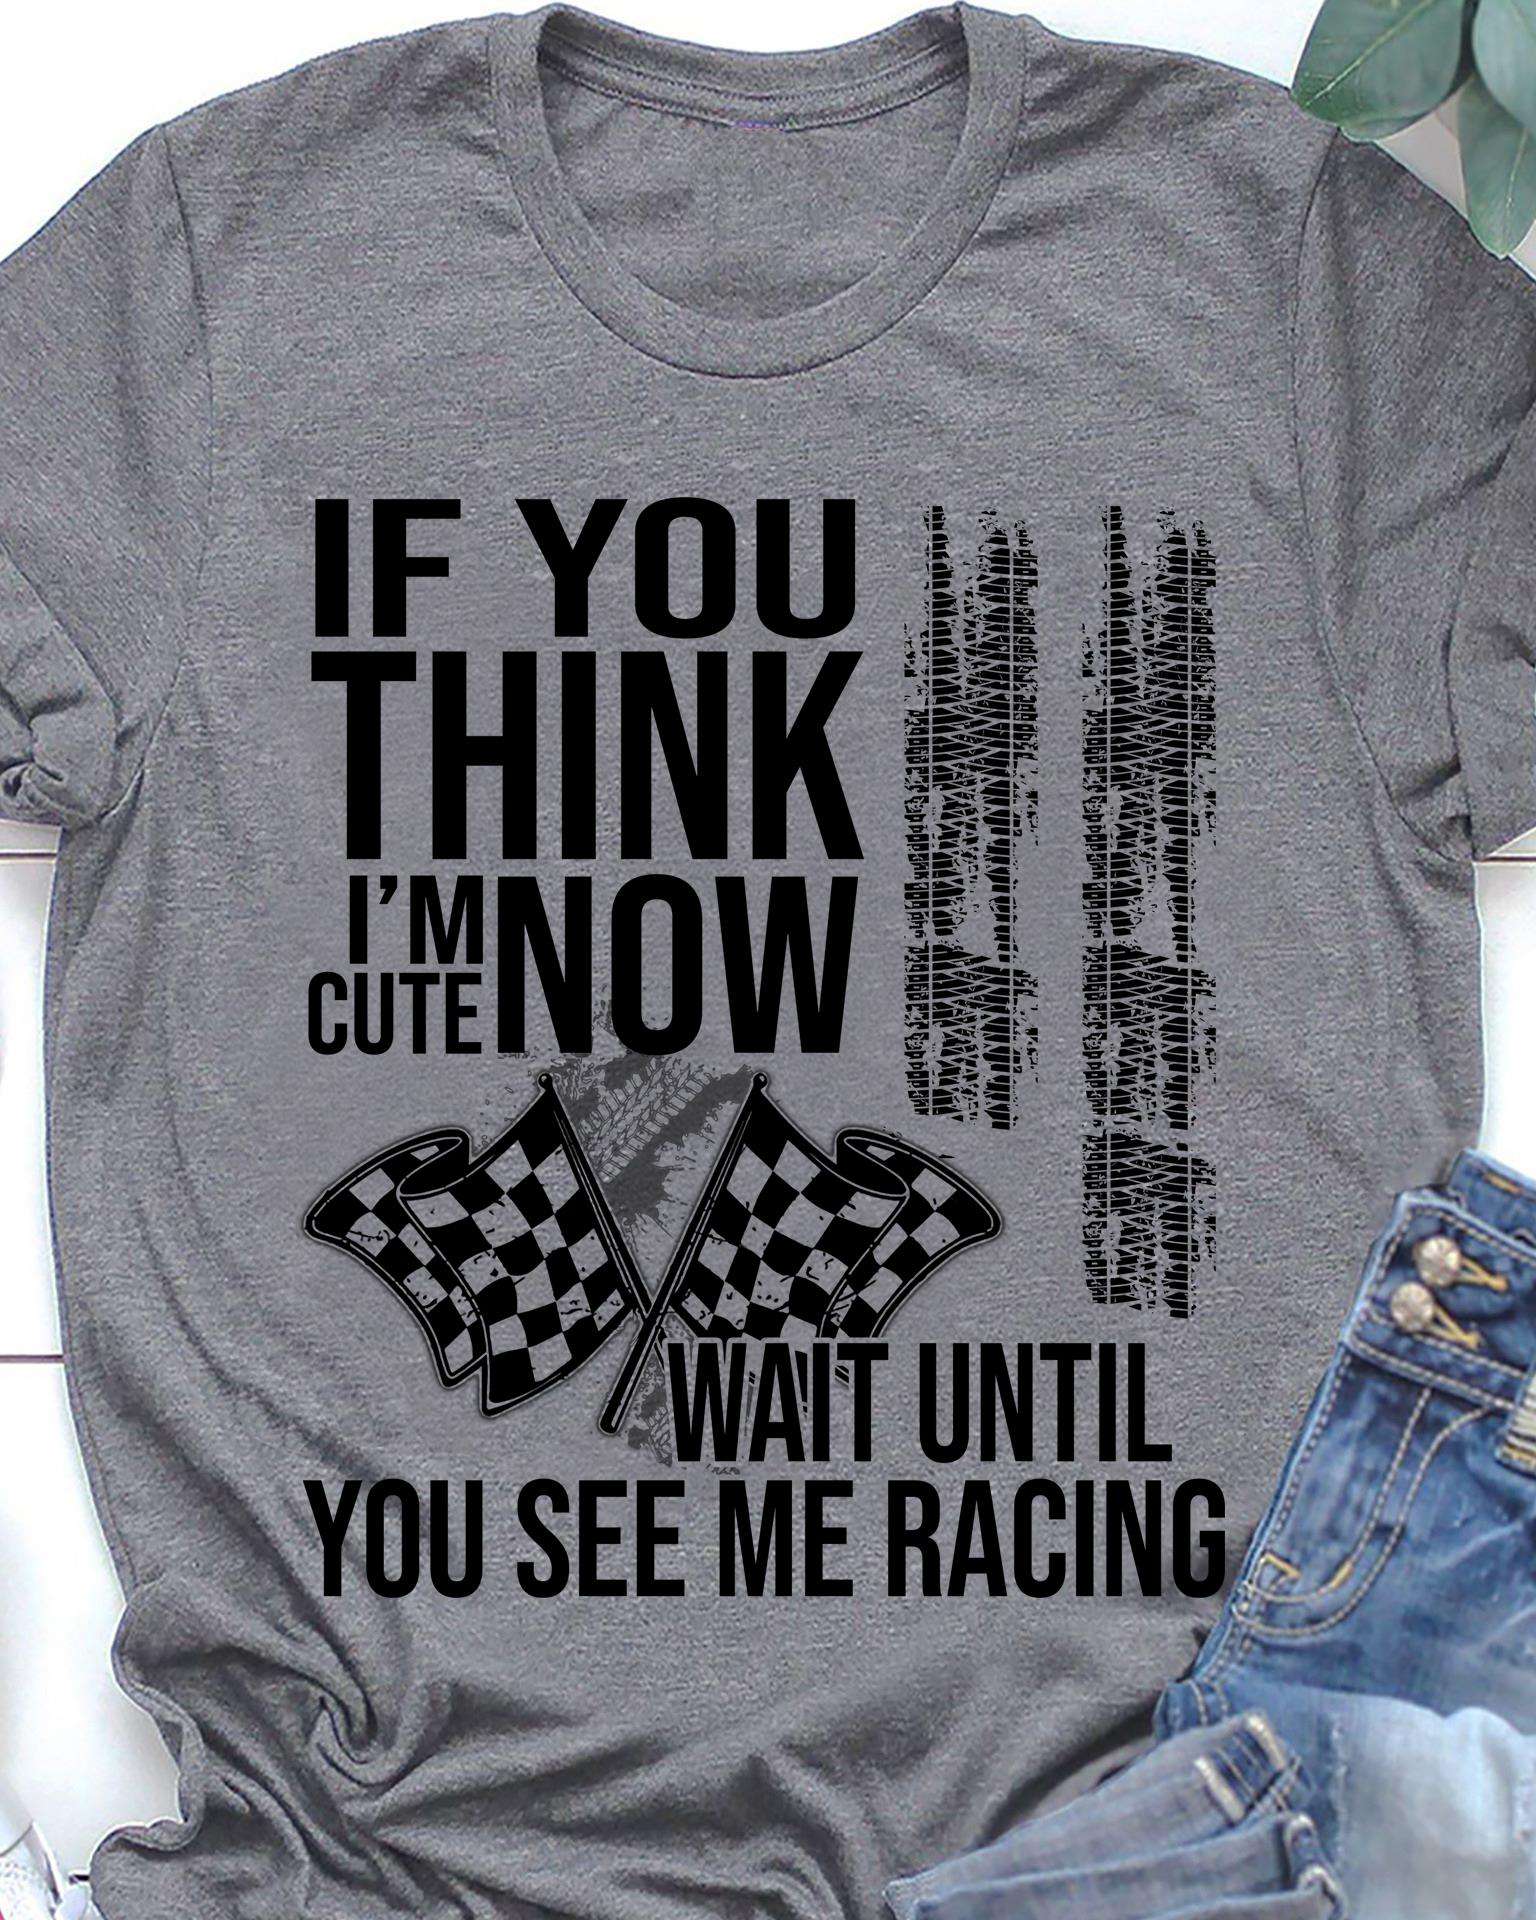 If you think I'm cute now, wait until you see me racing - Gift for racers, love to race